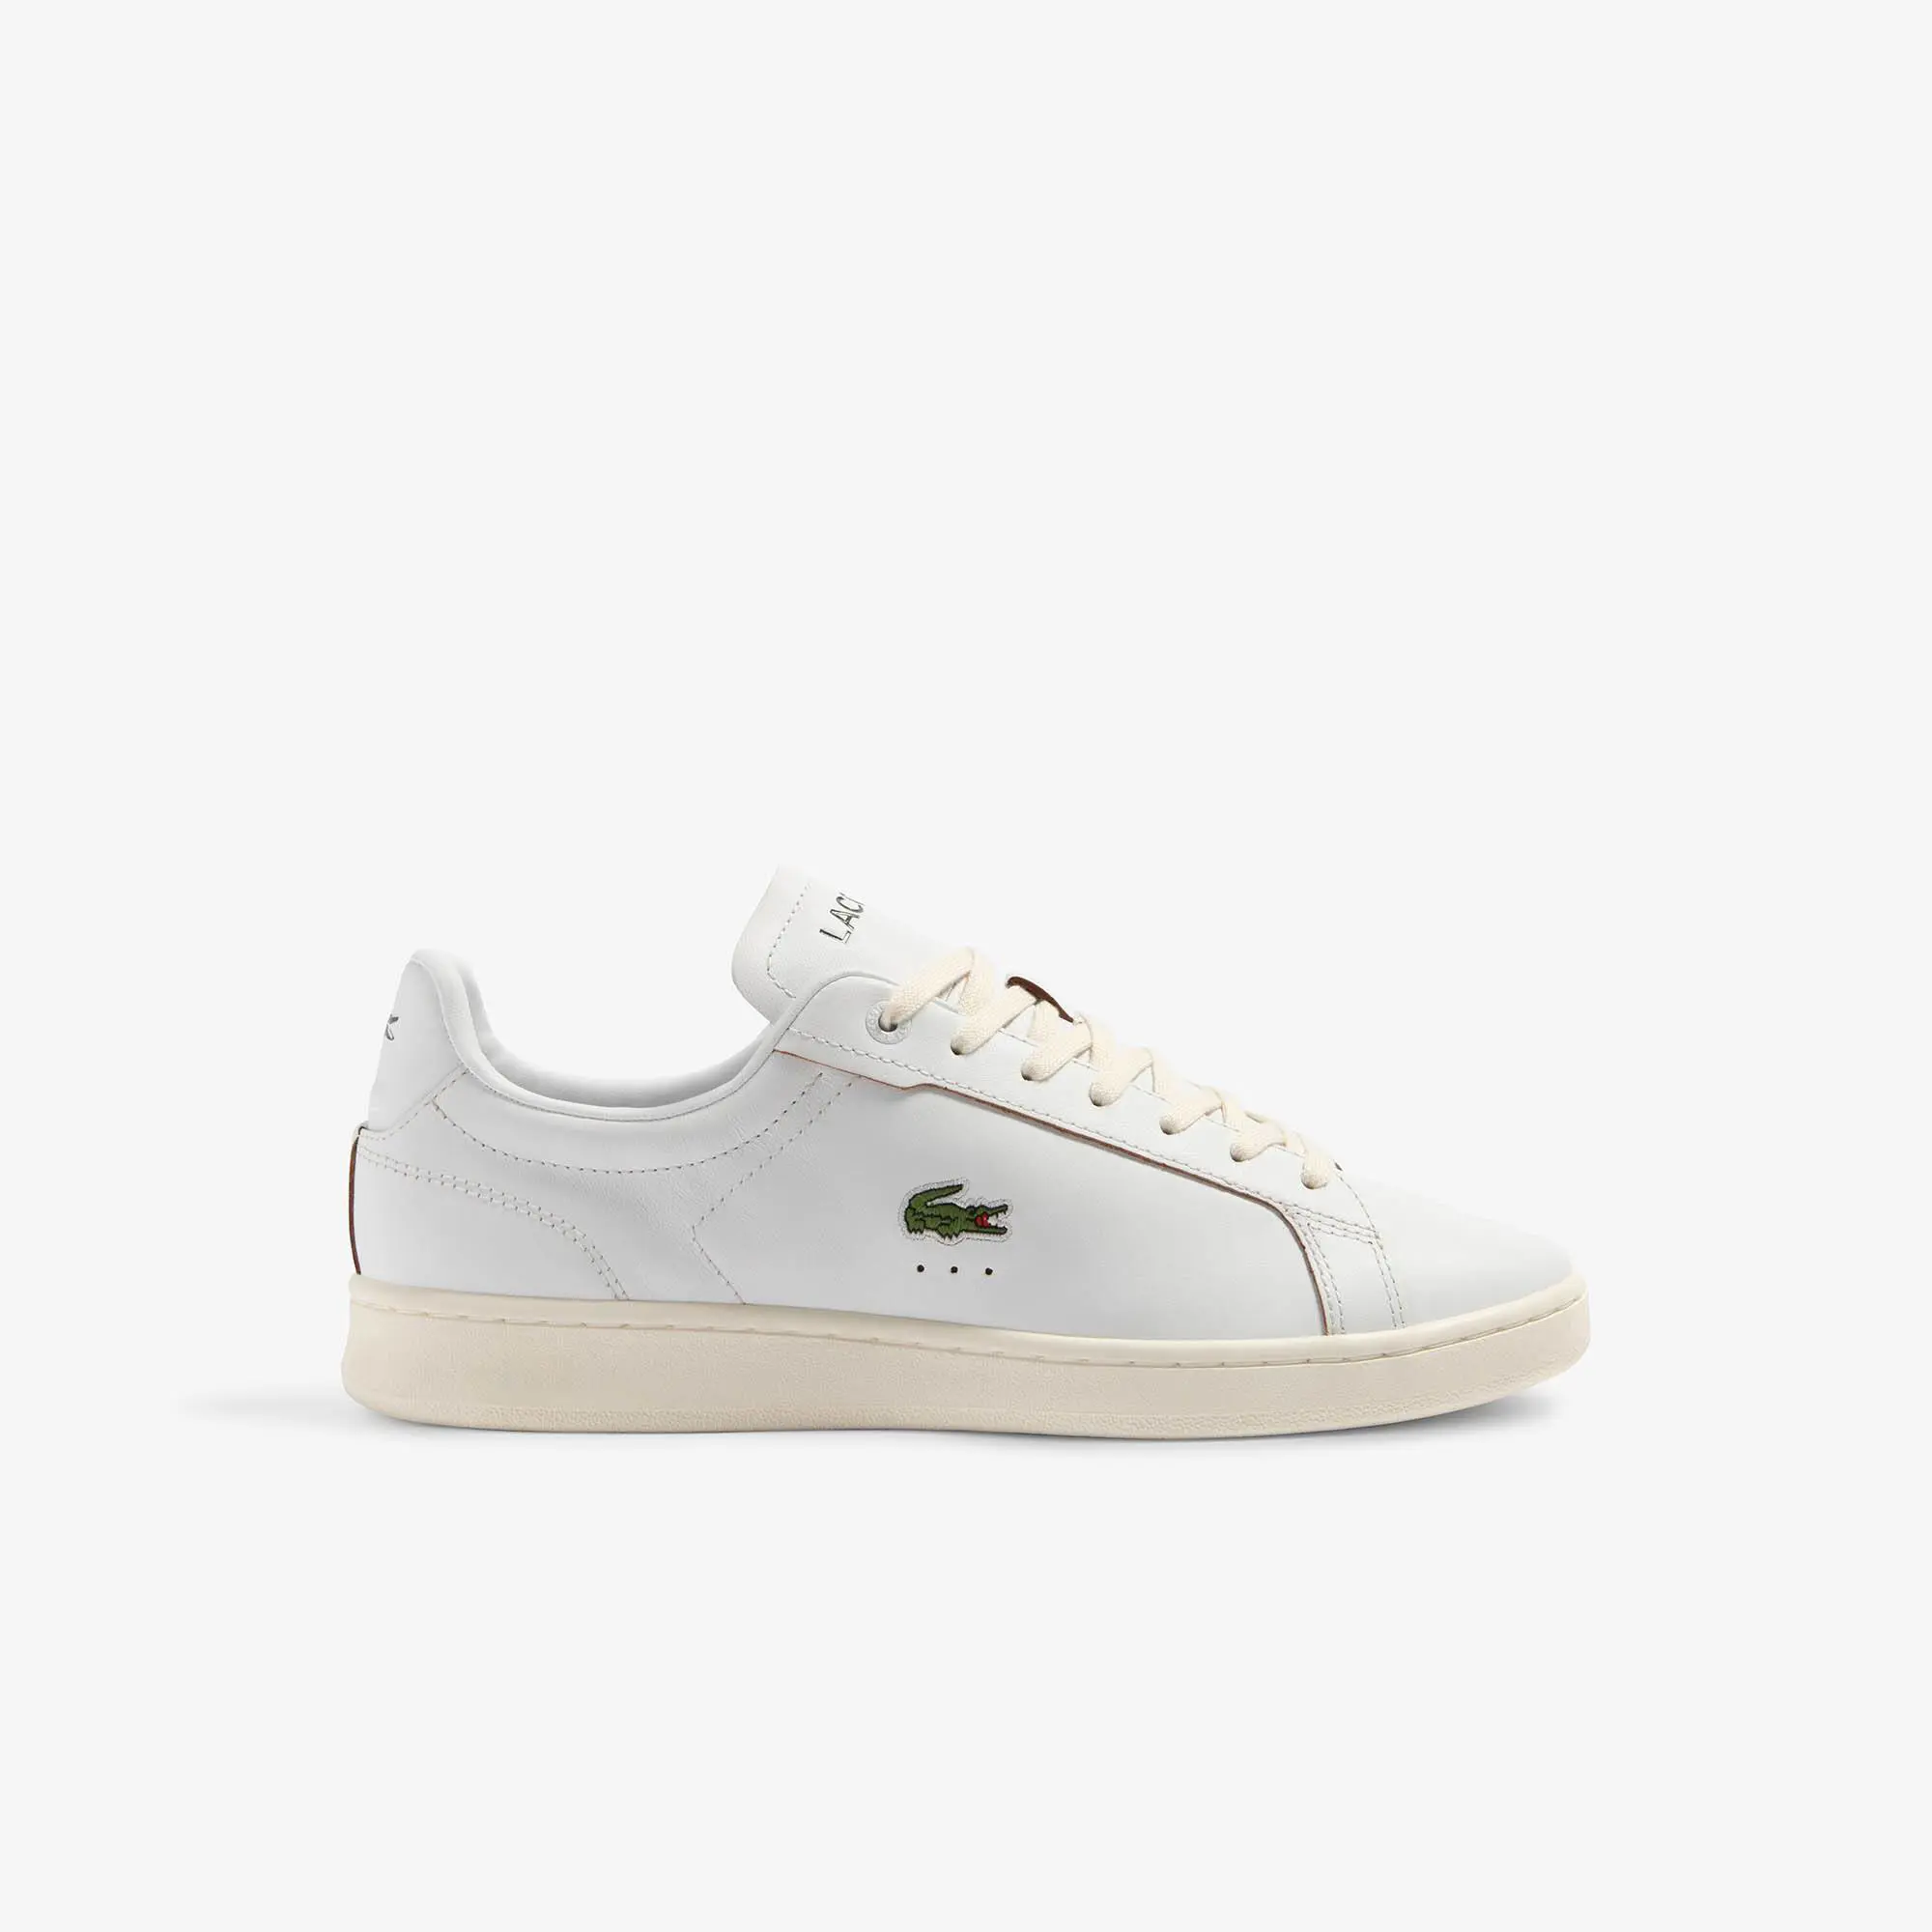 Lacoste Men's Carnaby Pro Tone-on-Tone Leather Sneakers. 1